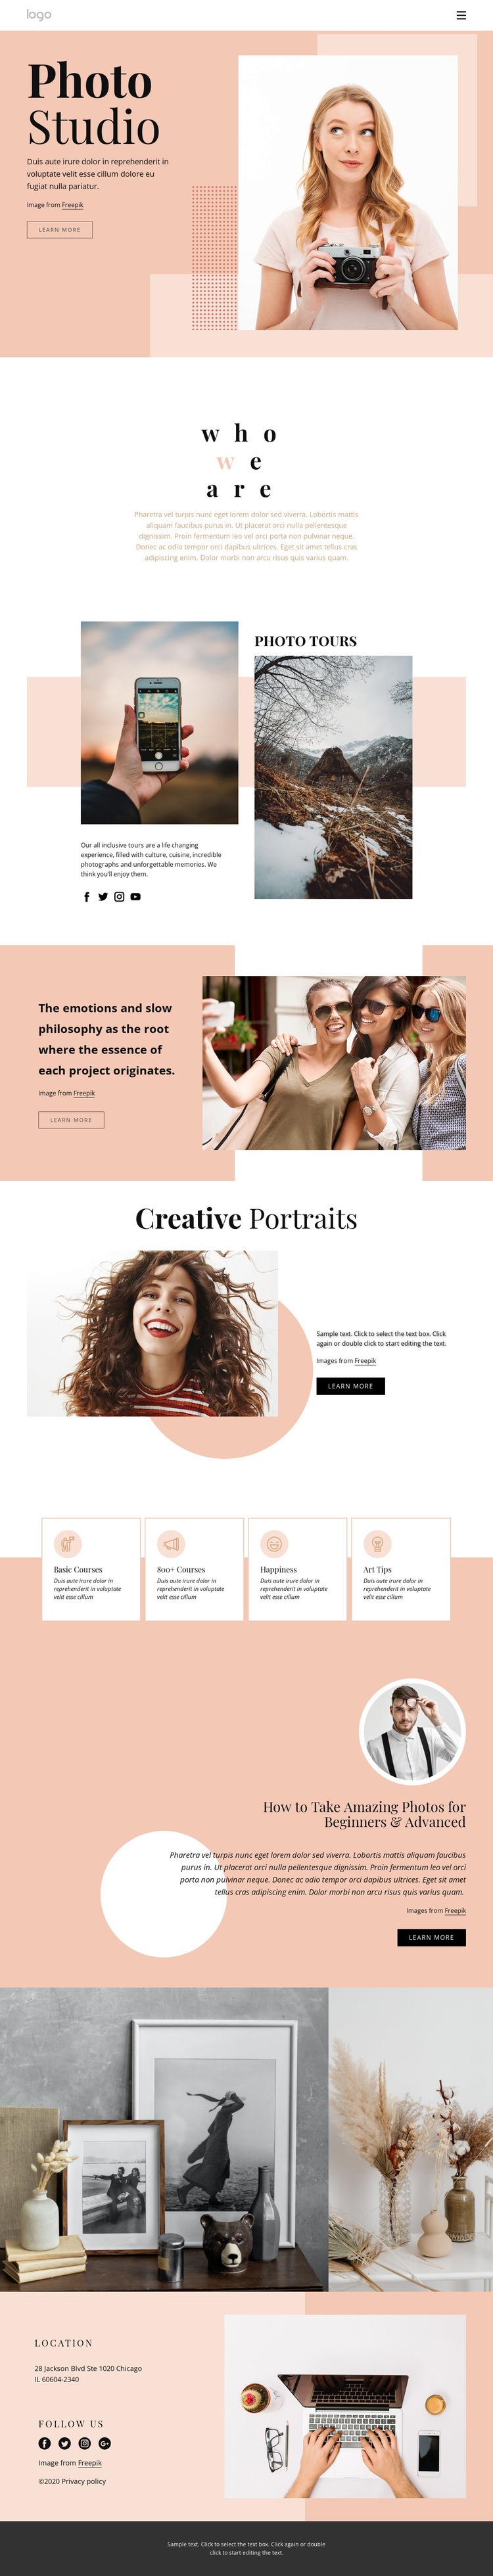 Photography courses Wix Template Alternative